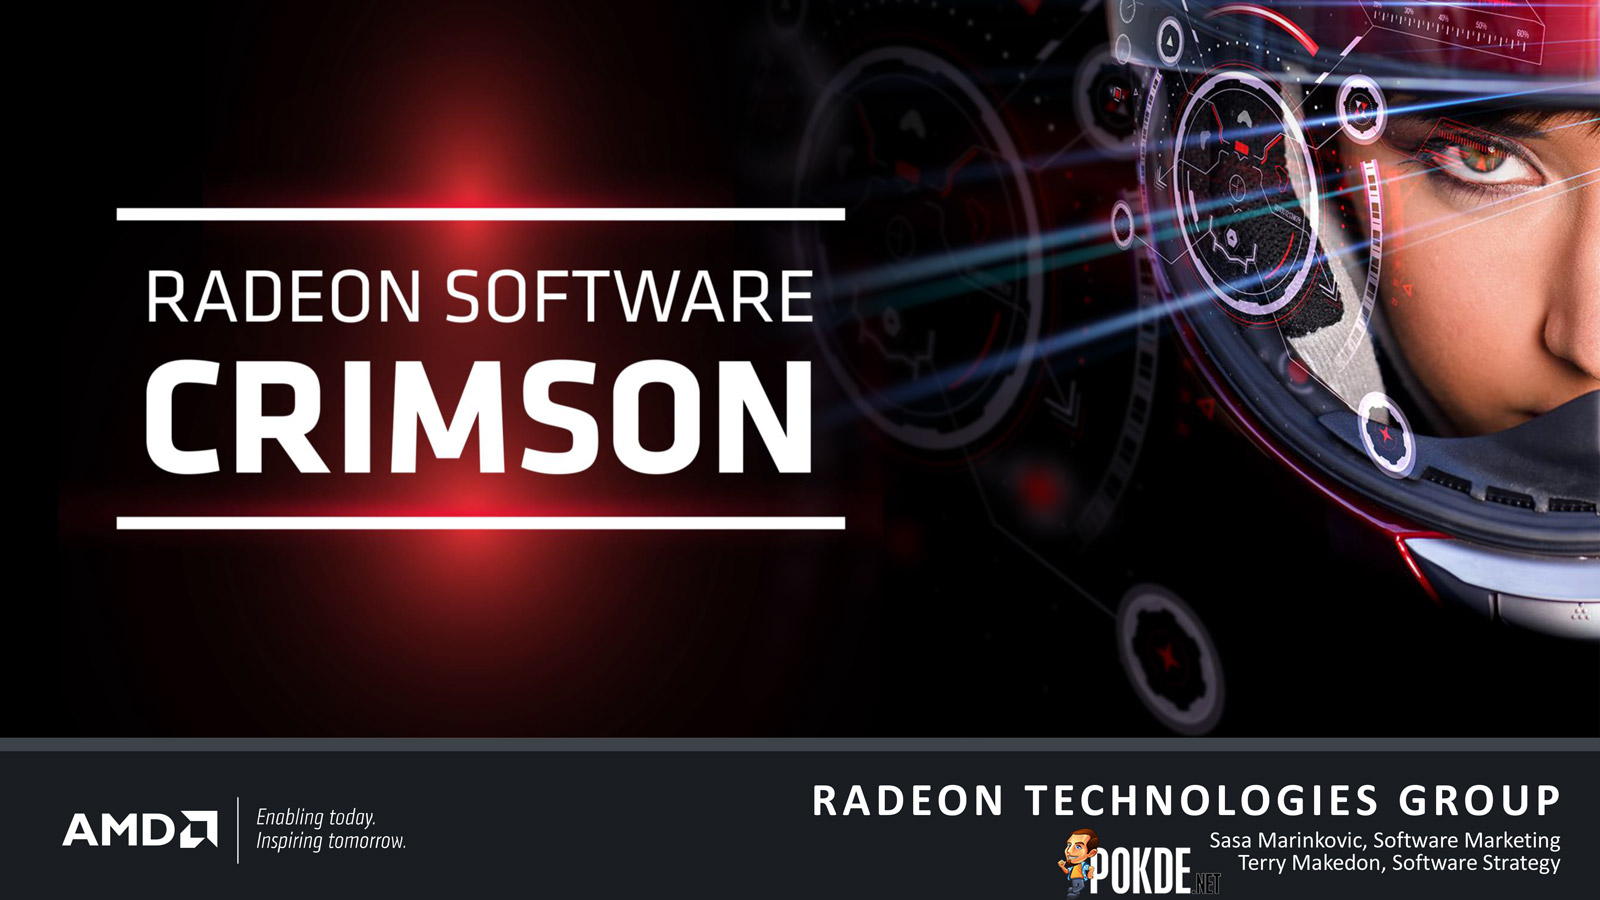 Radeon Technologies Group launched their first product today — Radeon Software Crimson Edition 26